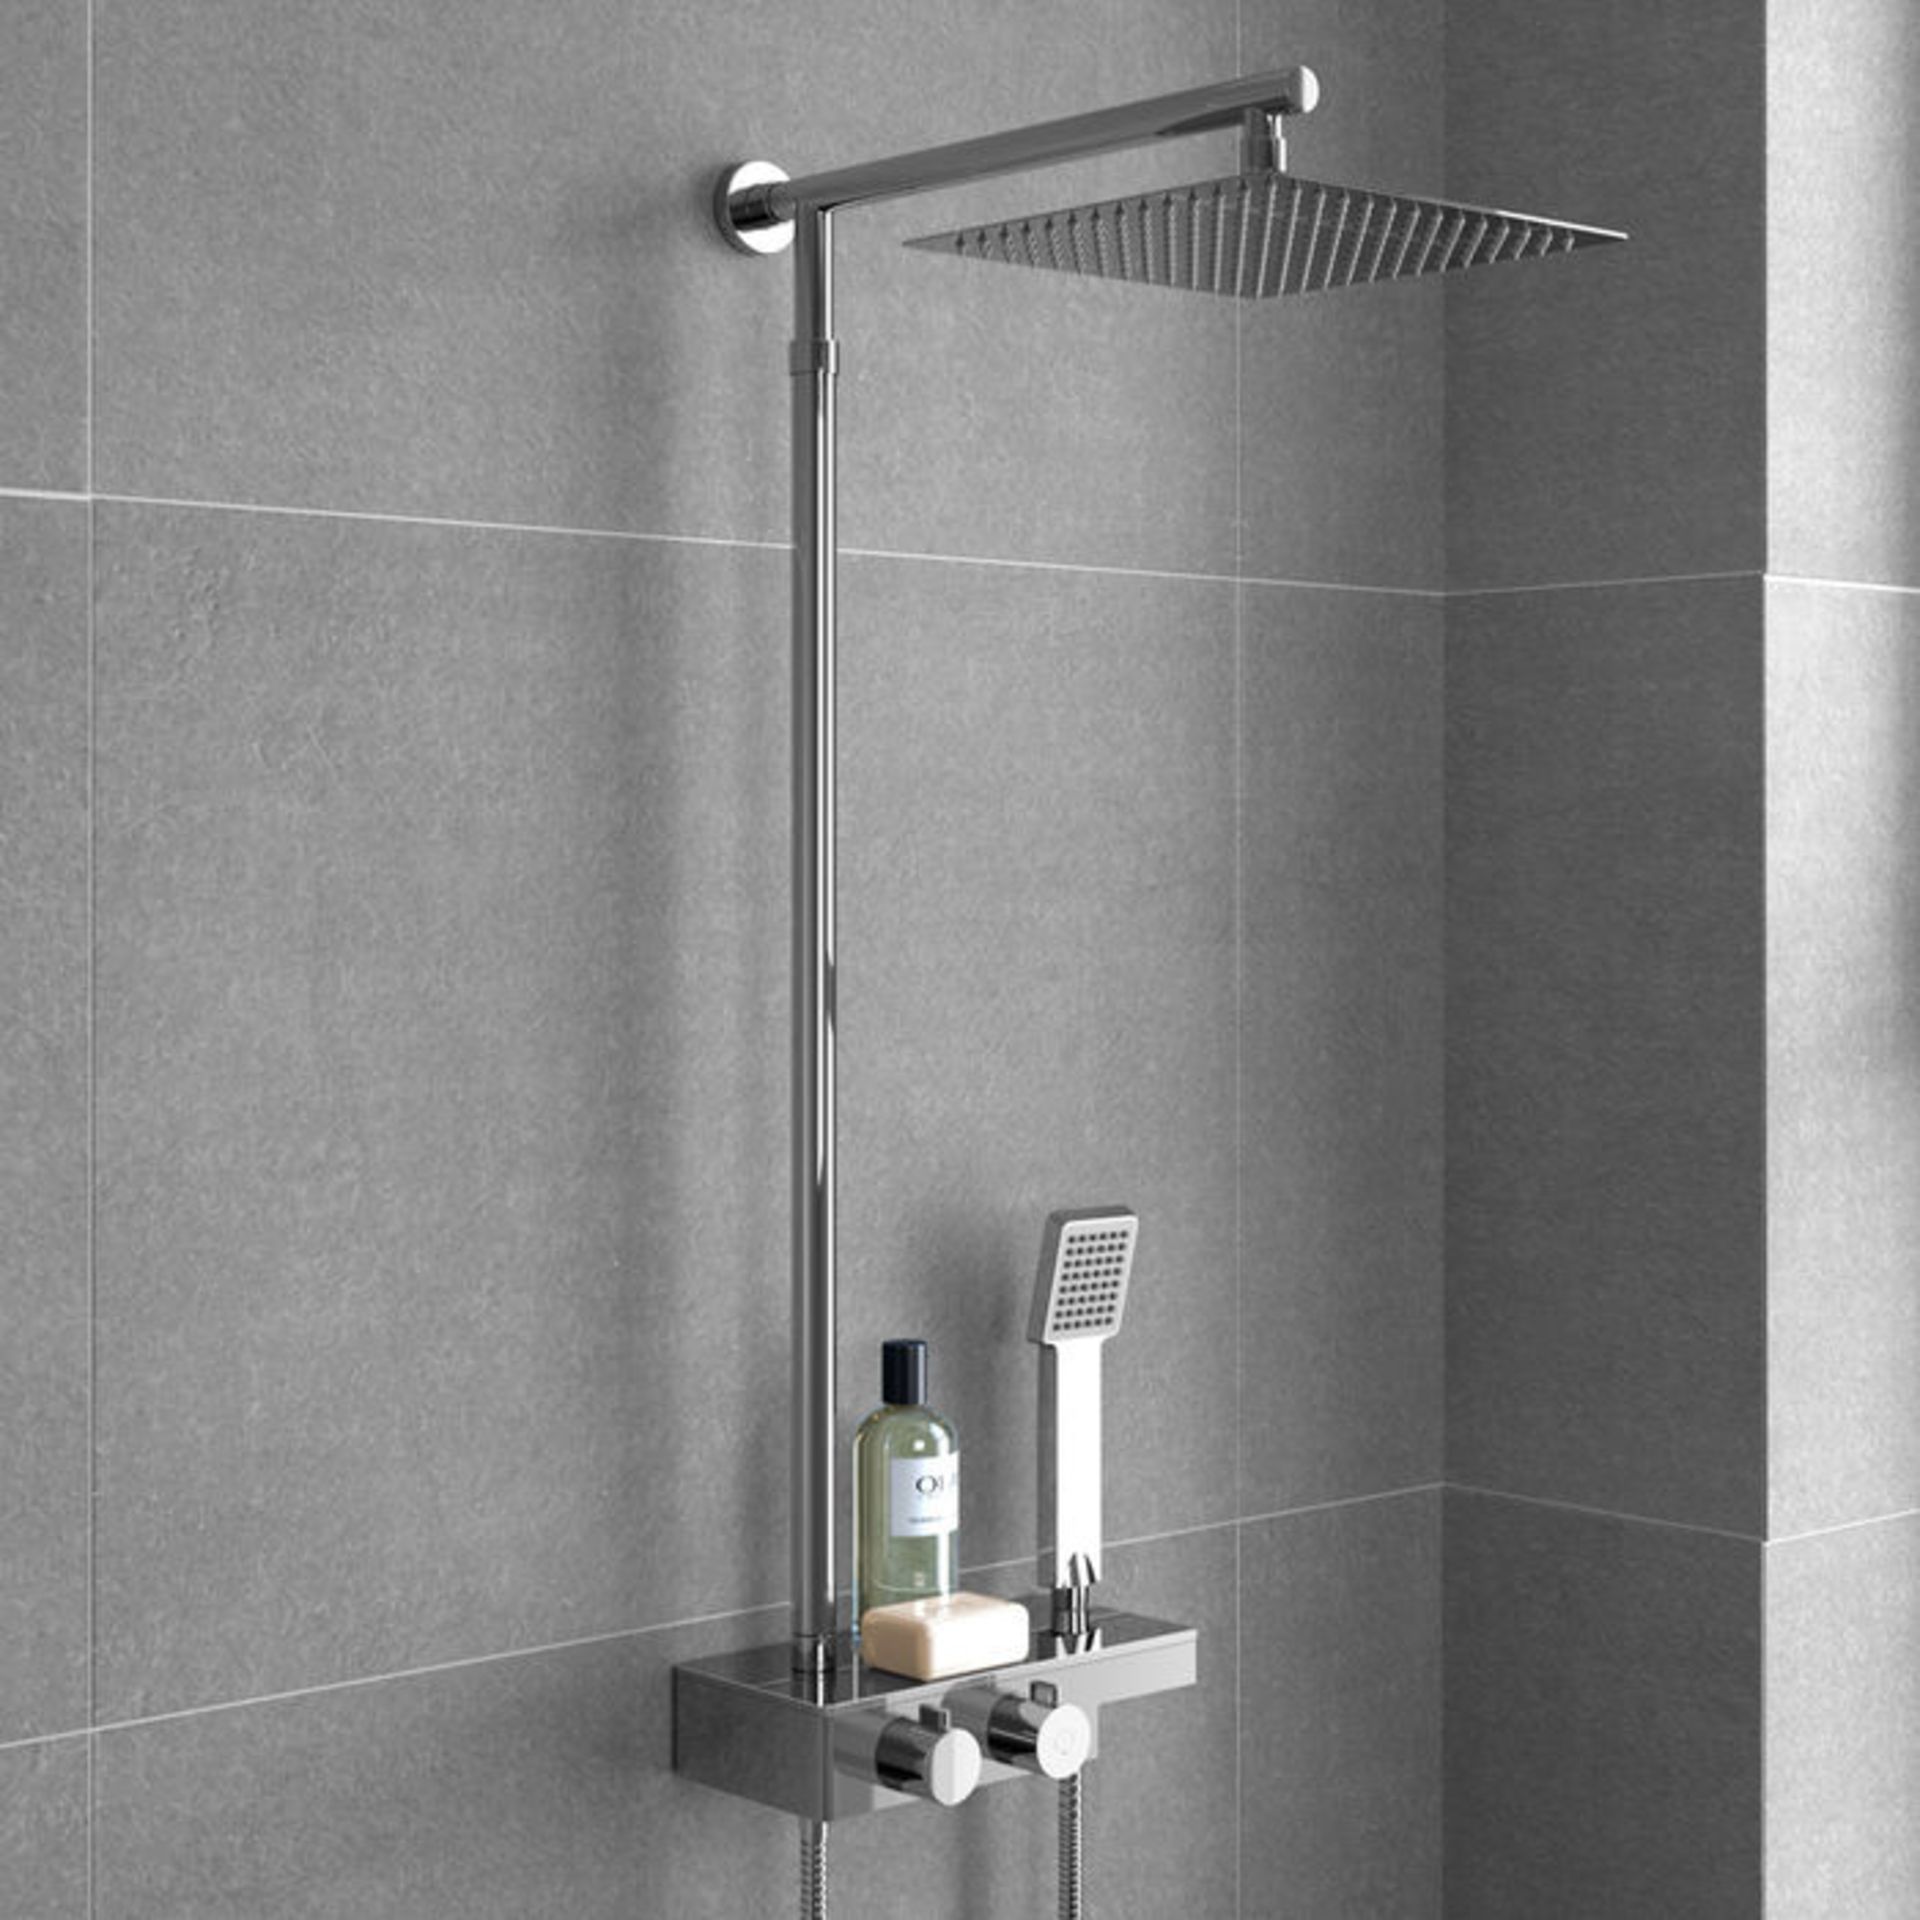 (L29) Thermostatic Exposed Shower Kit 250mm Square Head Handheld., We love this because it creates a - Image 3 of 3